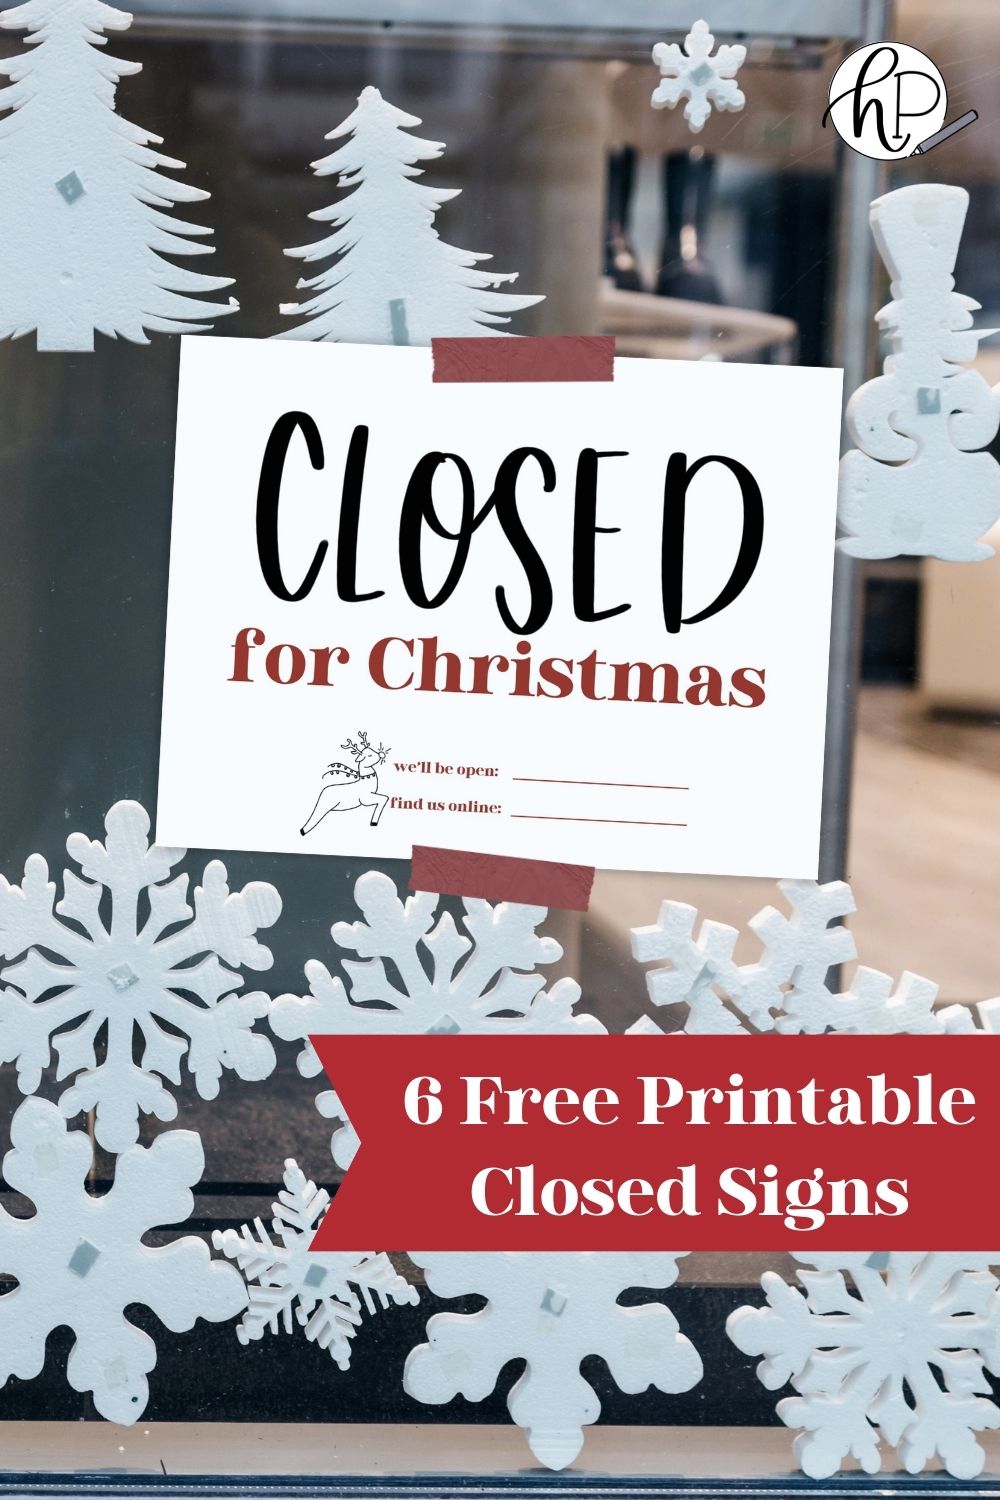 Free printable closed for christmas signage shown on holiday store window with text over that reads: 6 free printable closed signs